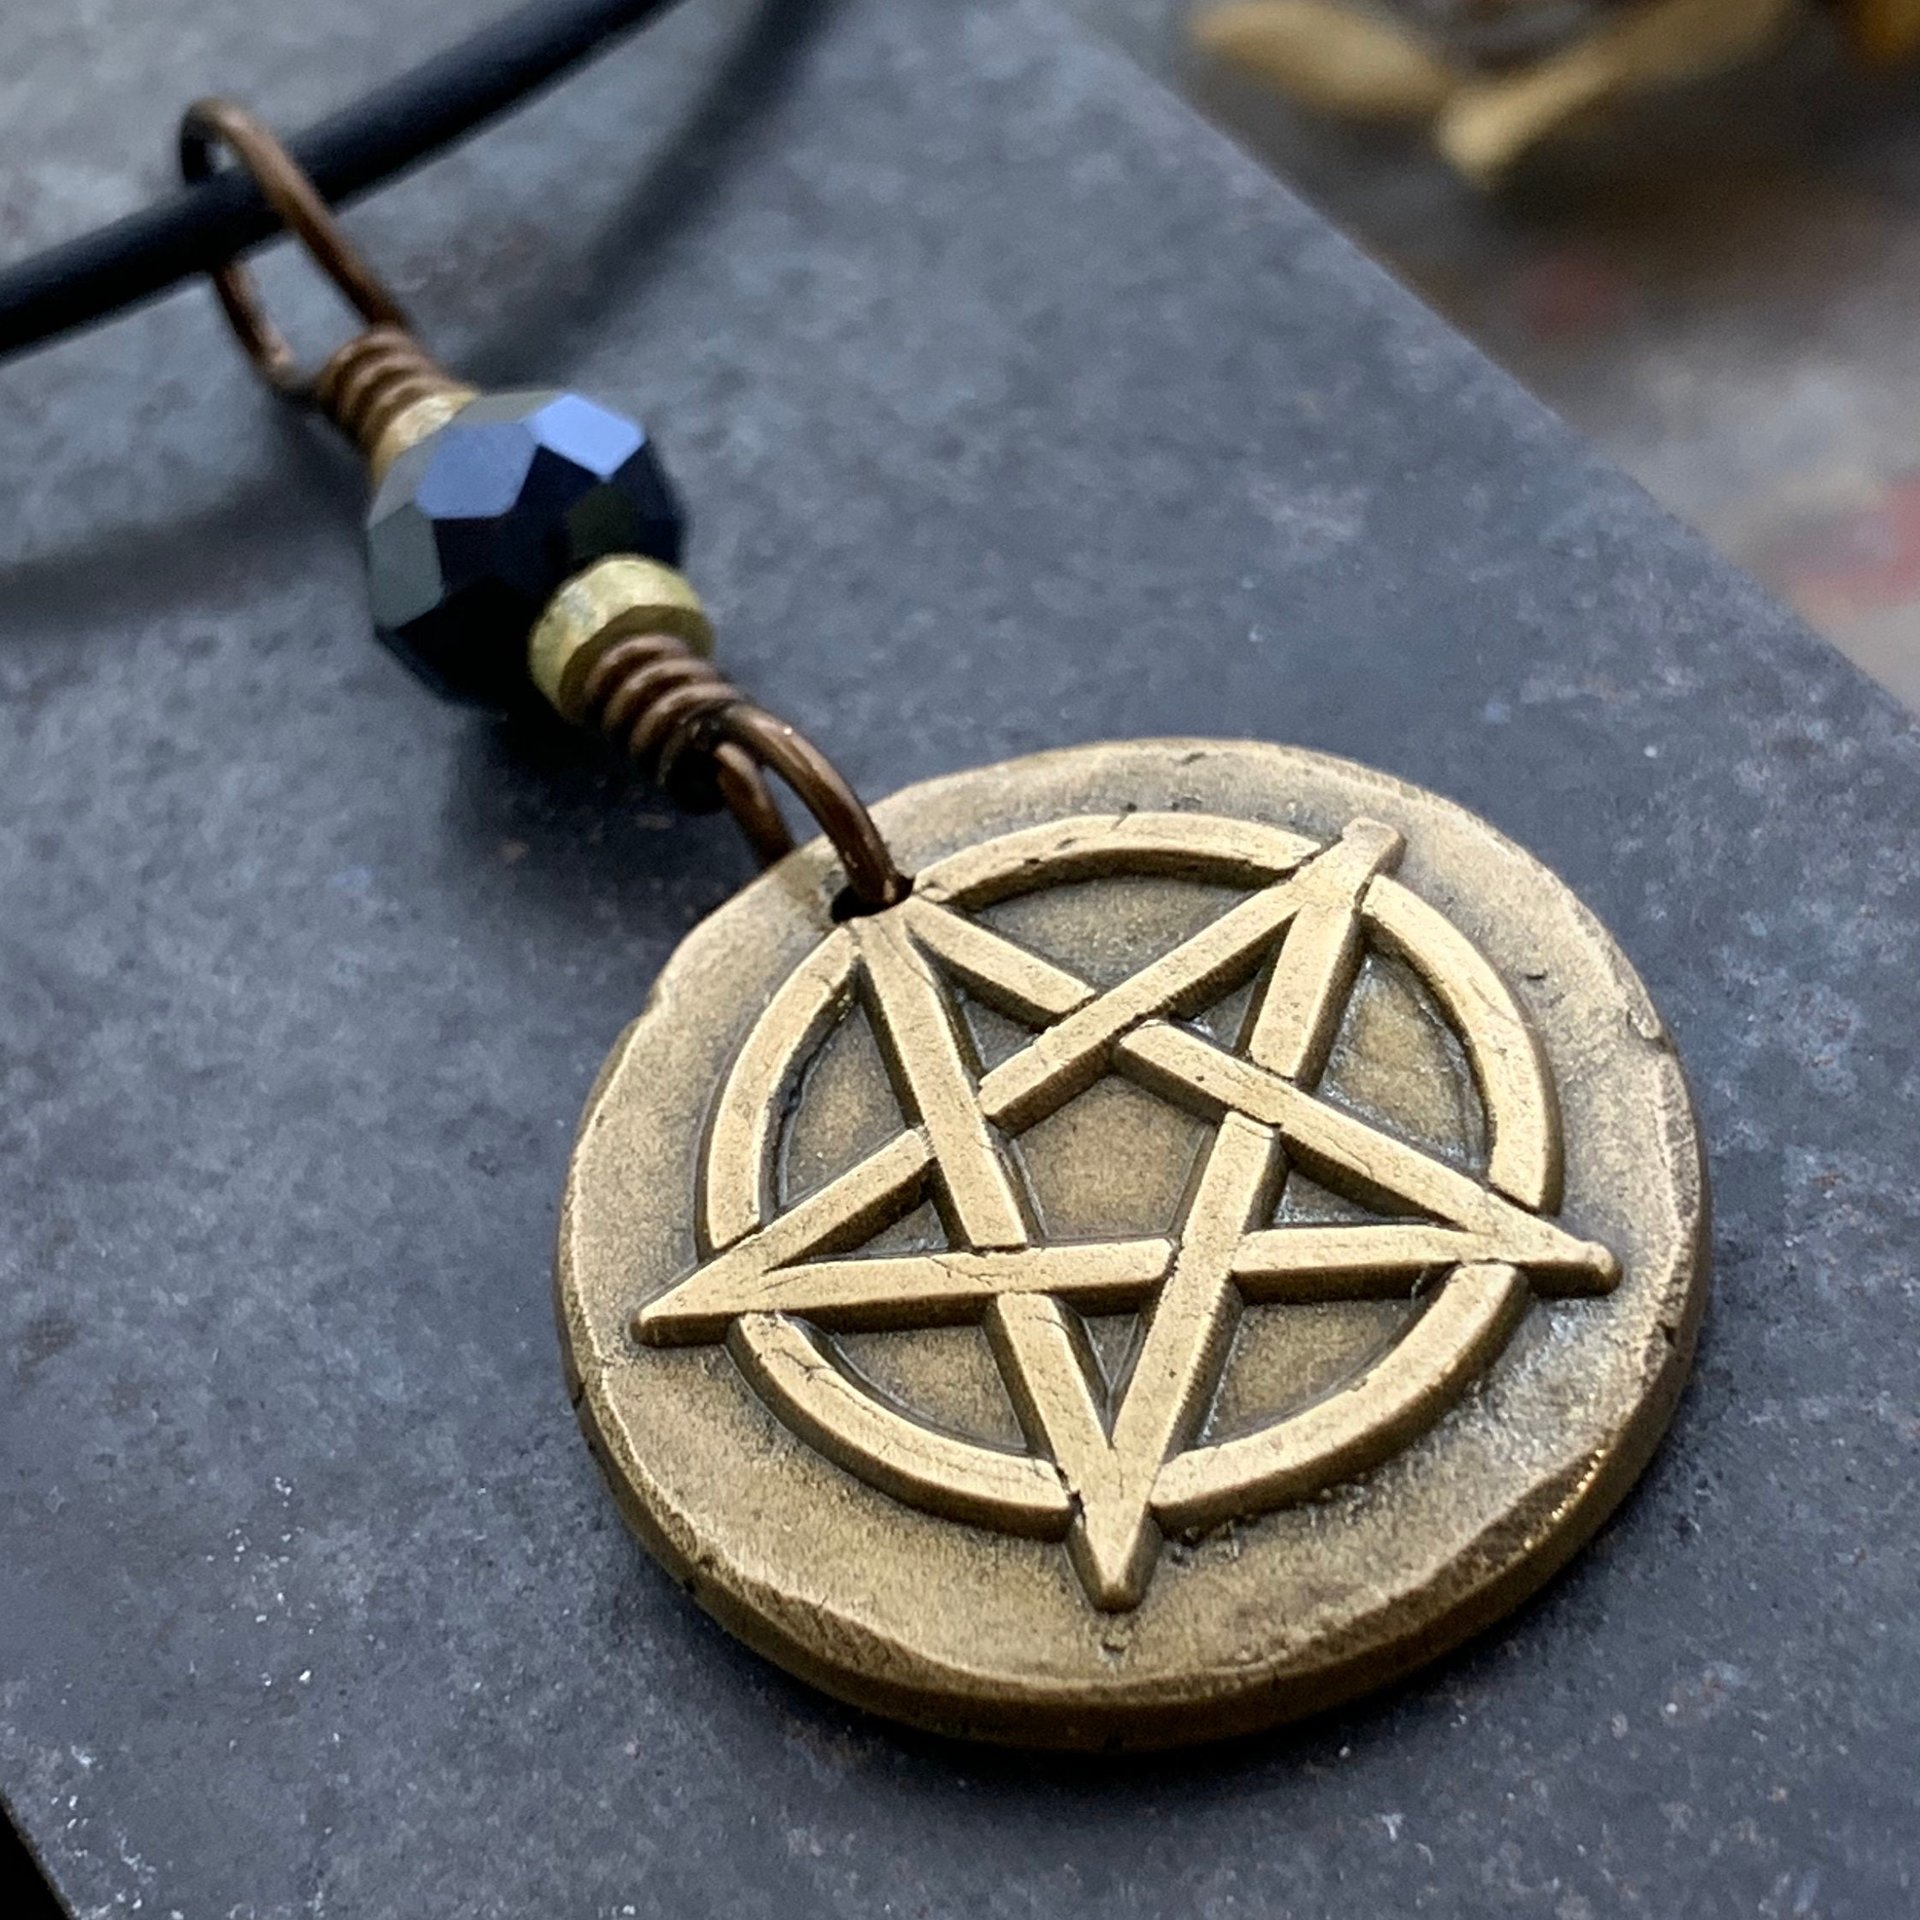 Pentagram Bronze Charm, Pentacle Pendant, Black Crystal Bead, Leather & Vegan Cords, Pagan Wicca, 5 Elements Star, Handmade, Witchy Things